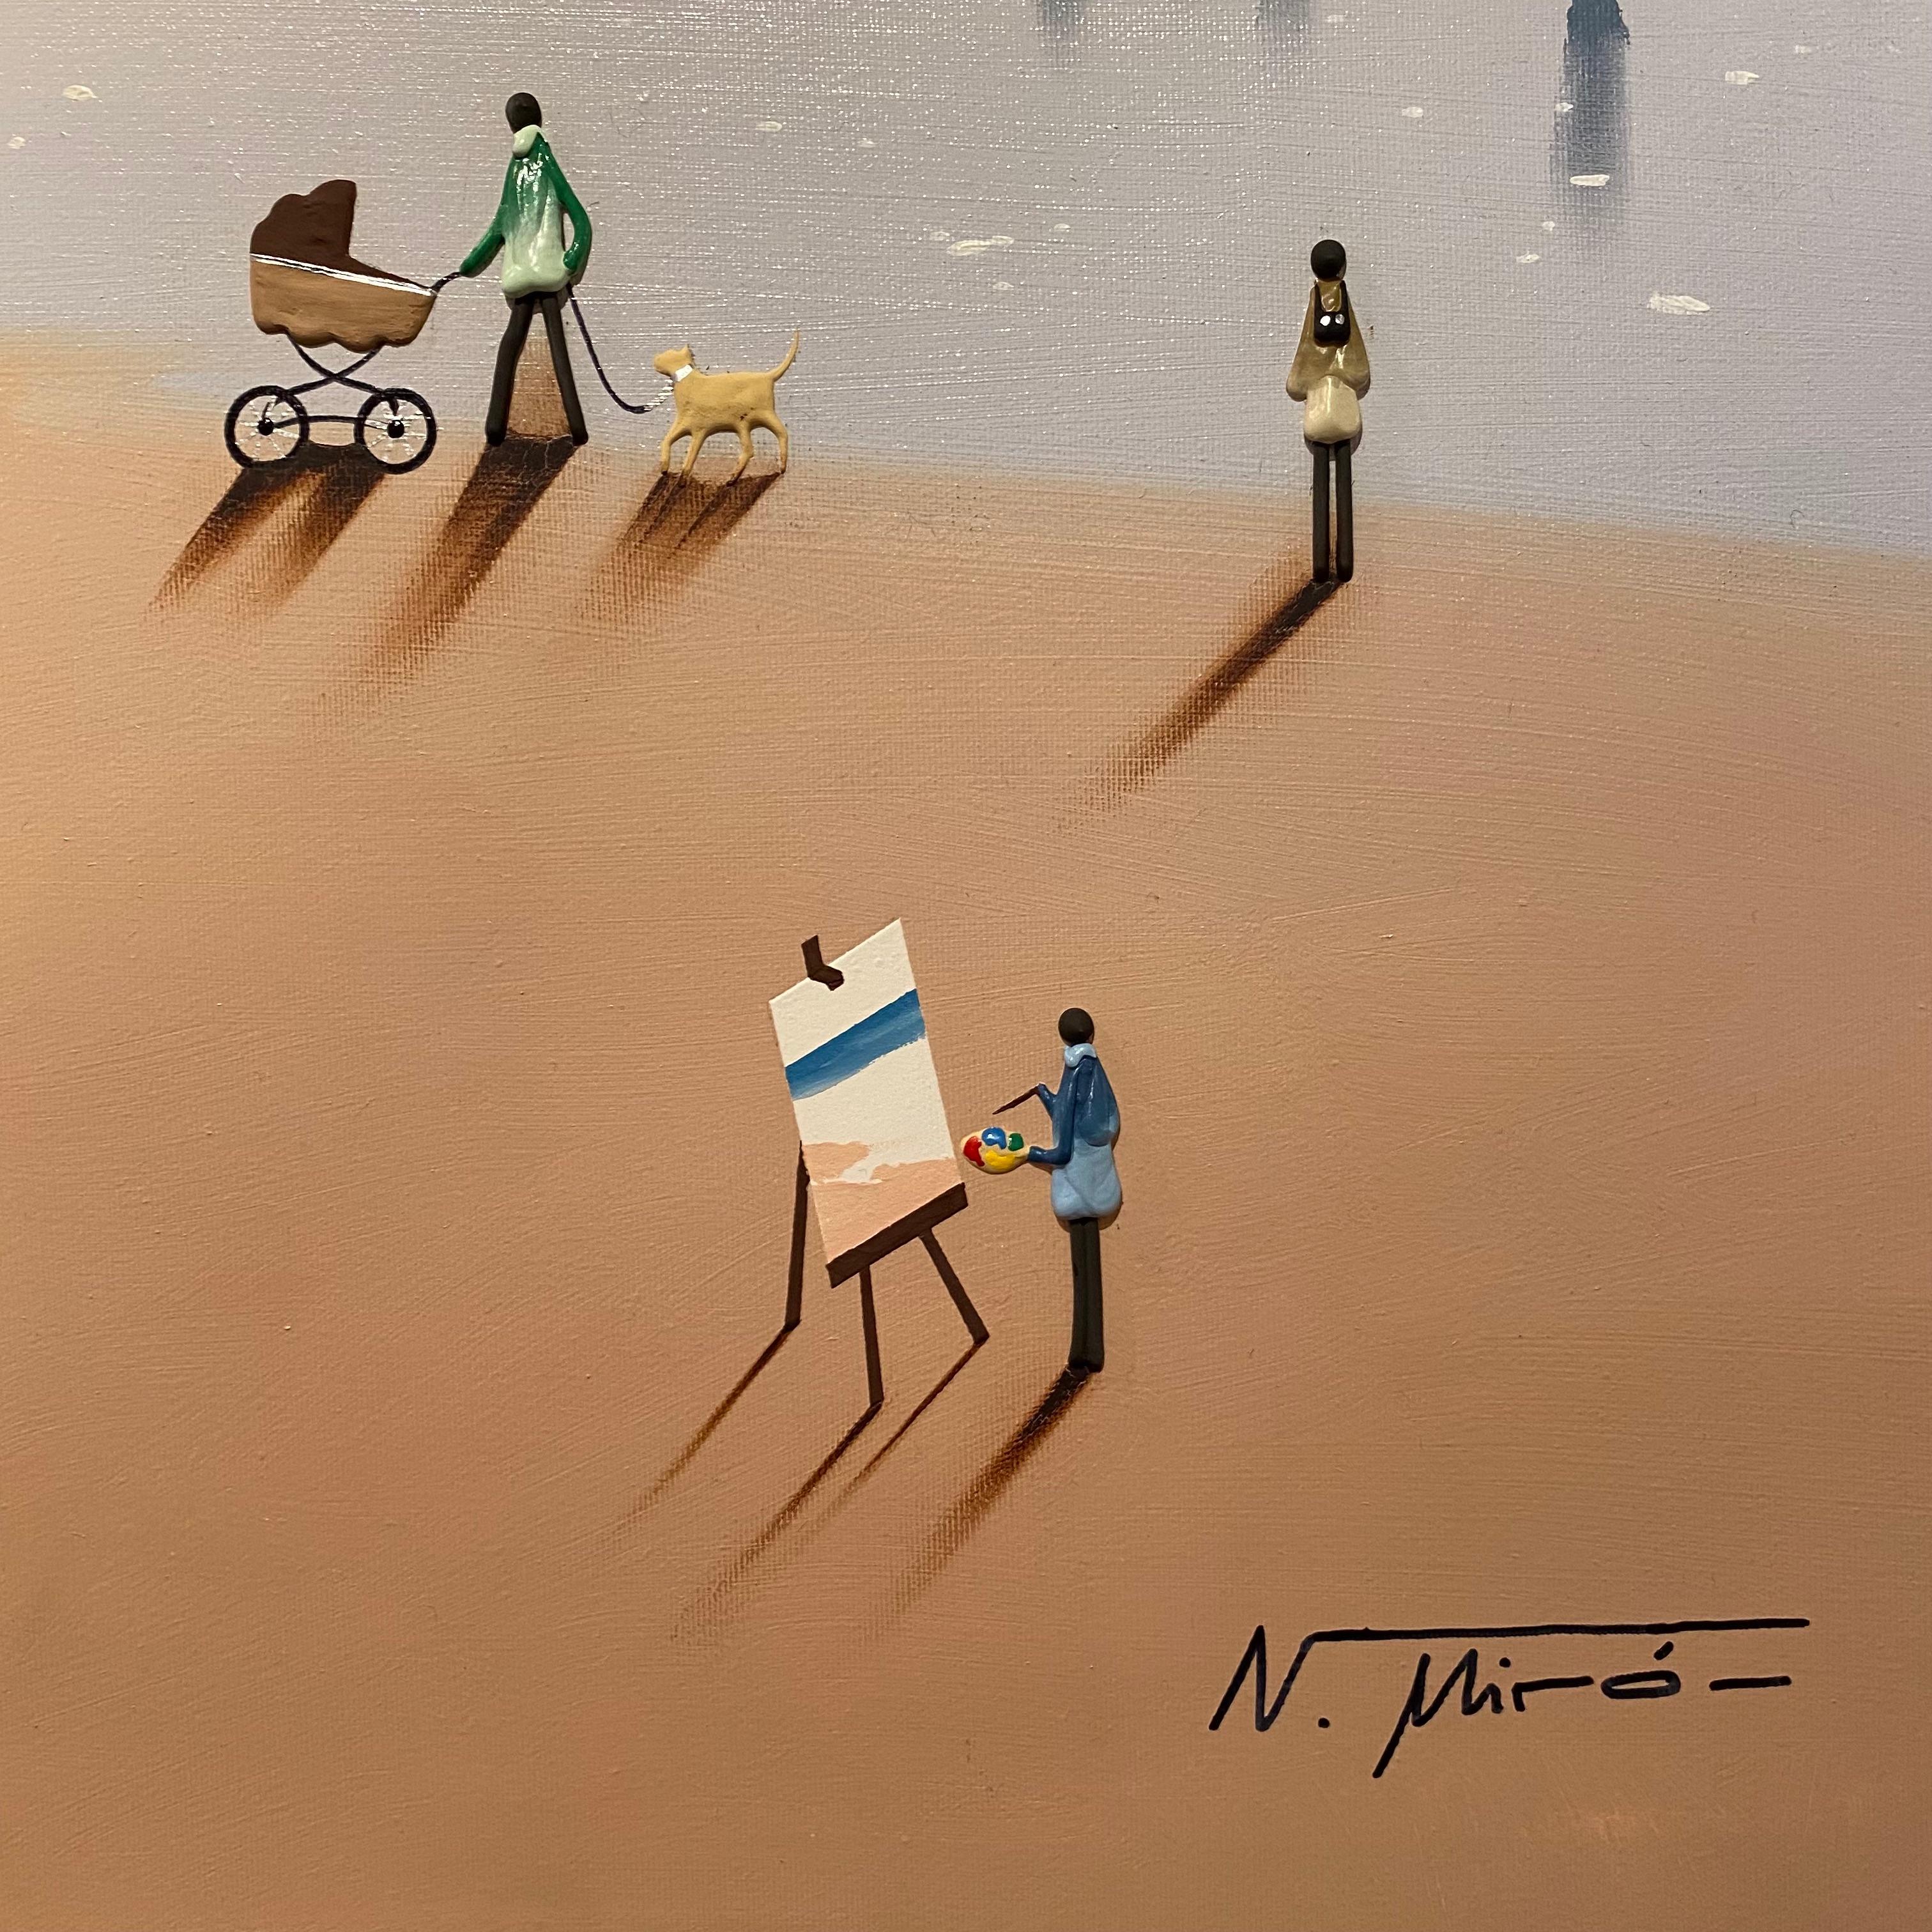 'Sparkling seas' Contemporary 3D beach Landscape painting with figures, waves - Gray Figurative Painting by N. Miro